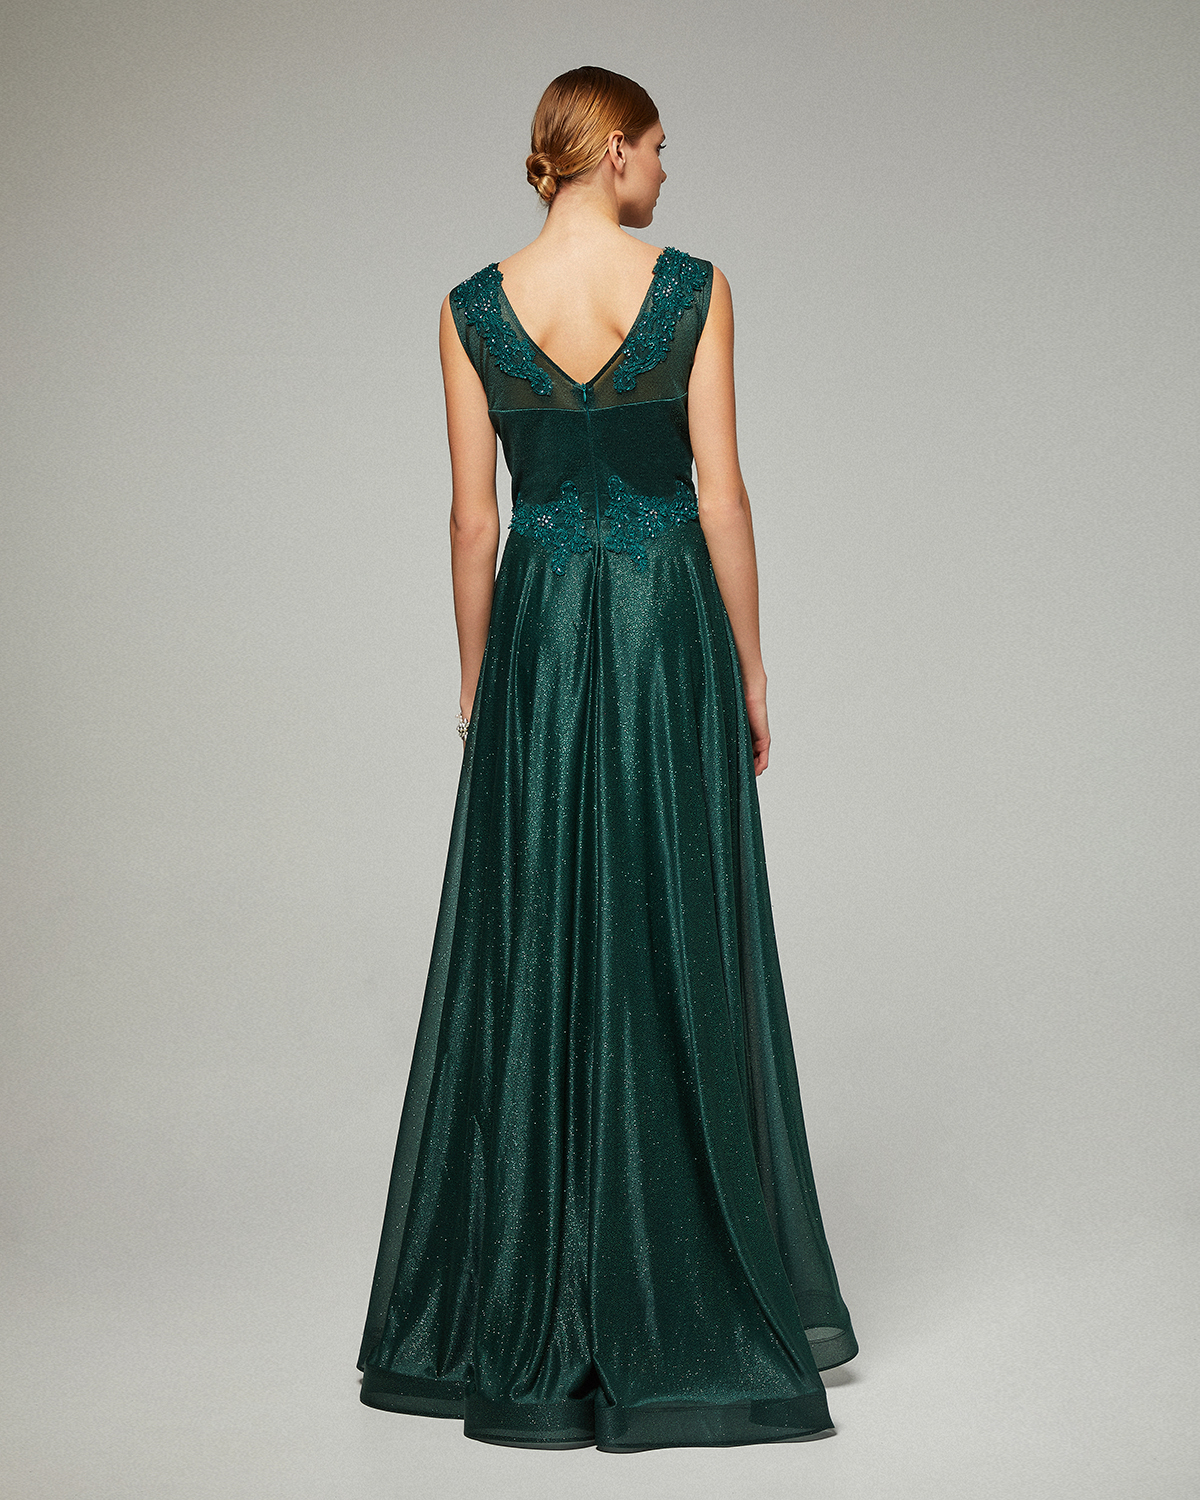 Classic Dresses / Long evening with shining fabric and beaded top